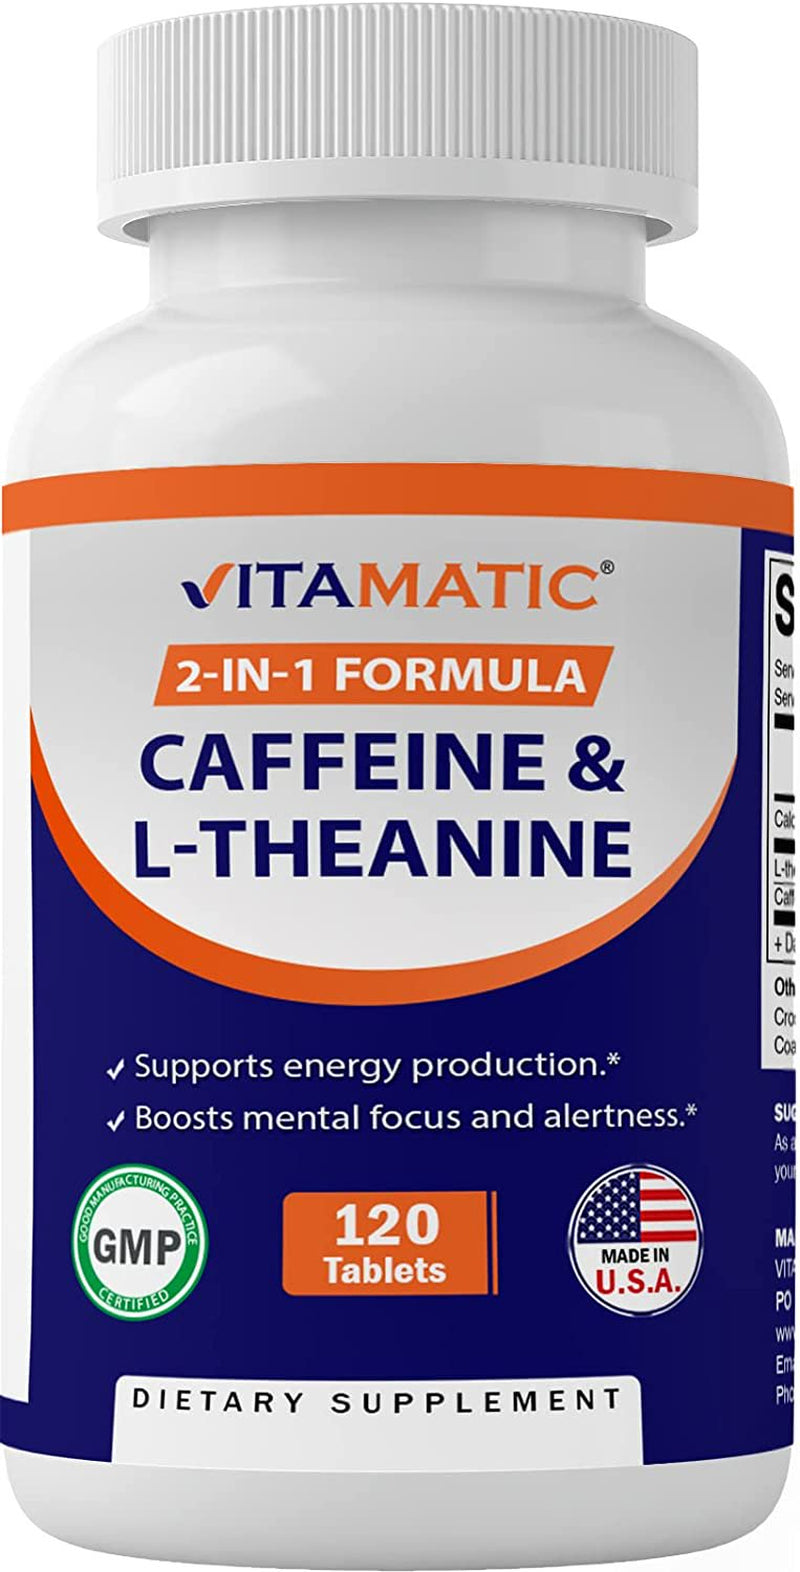 2 Packs Vitamatic Caffeine Pills with L-Theanine - 300 Mg per Tablet - 120 Vegetarian Tablets - Nootropic Supplement for Focused Energy (Total 240 Tablets)